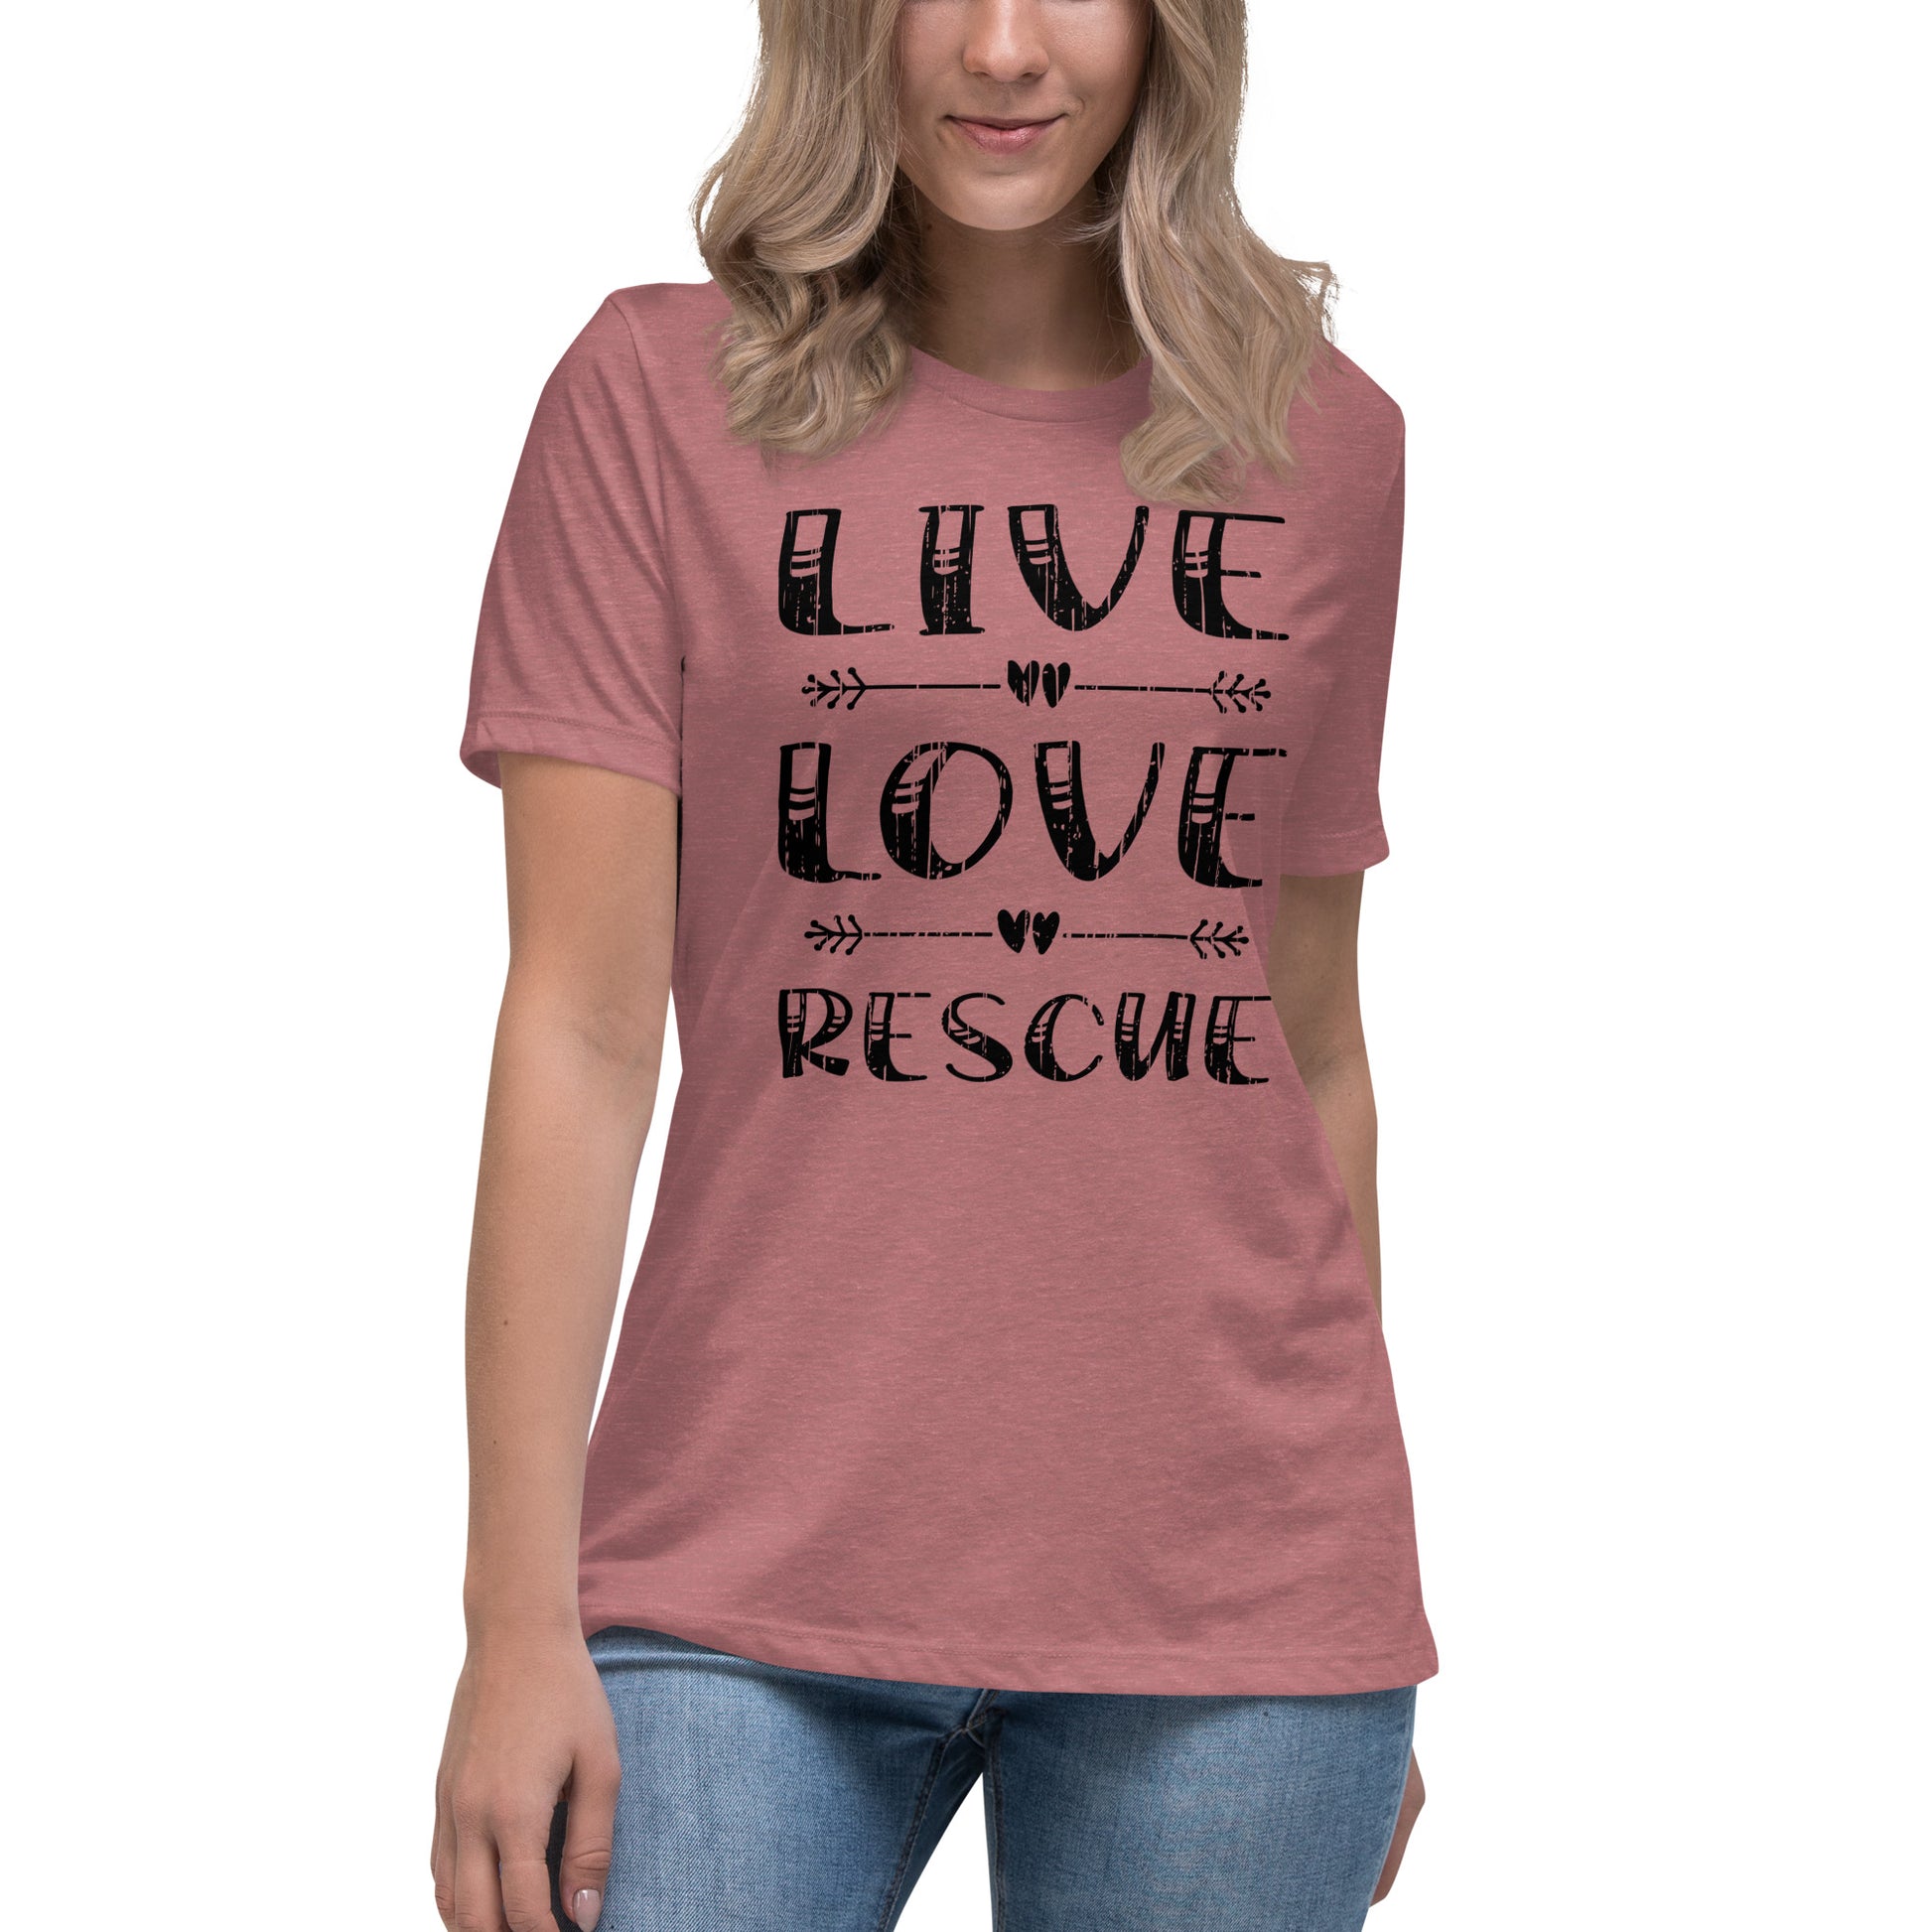 Live love rescue women’s relaxed fit t-shirts by Dog Artistry heather mauve color